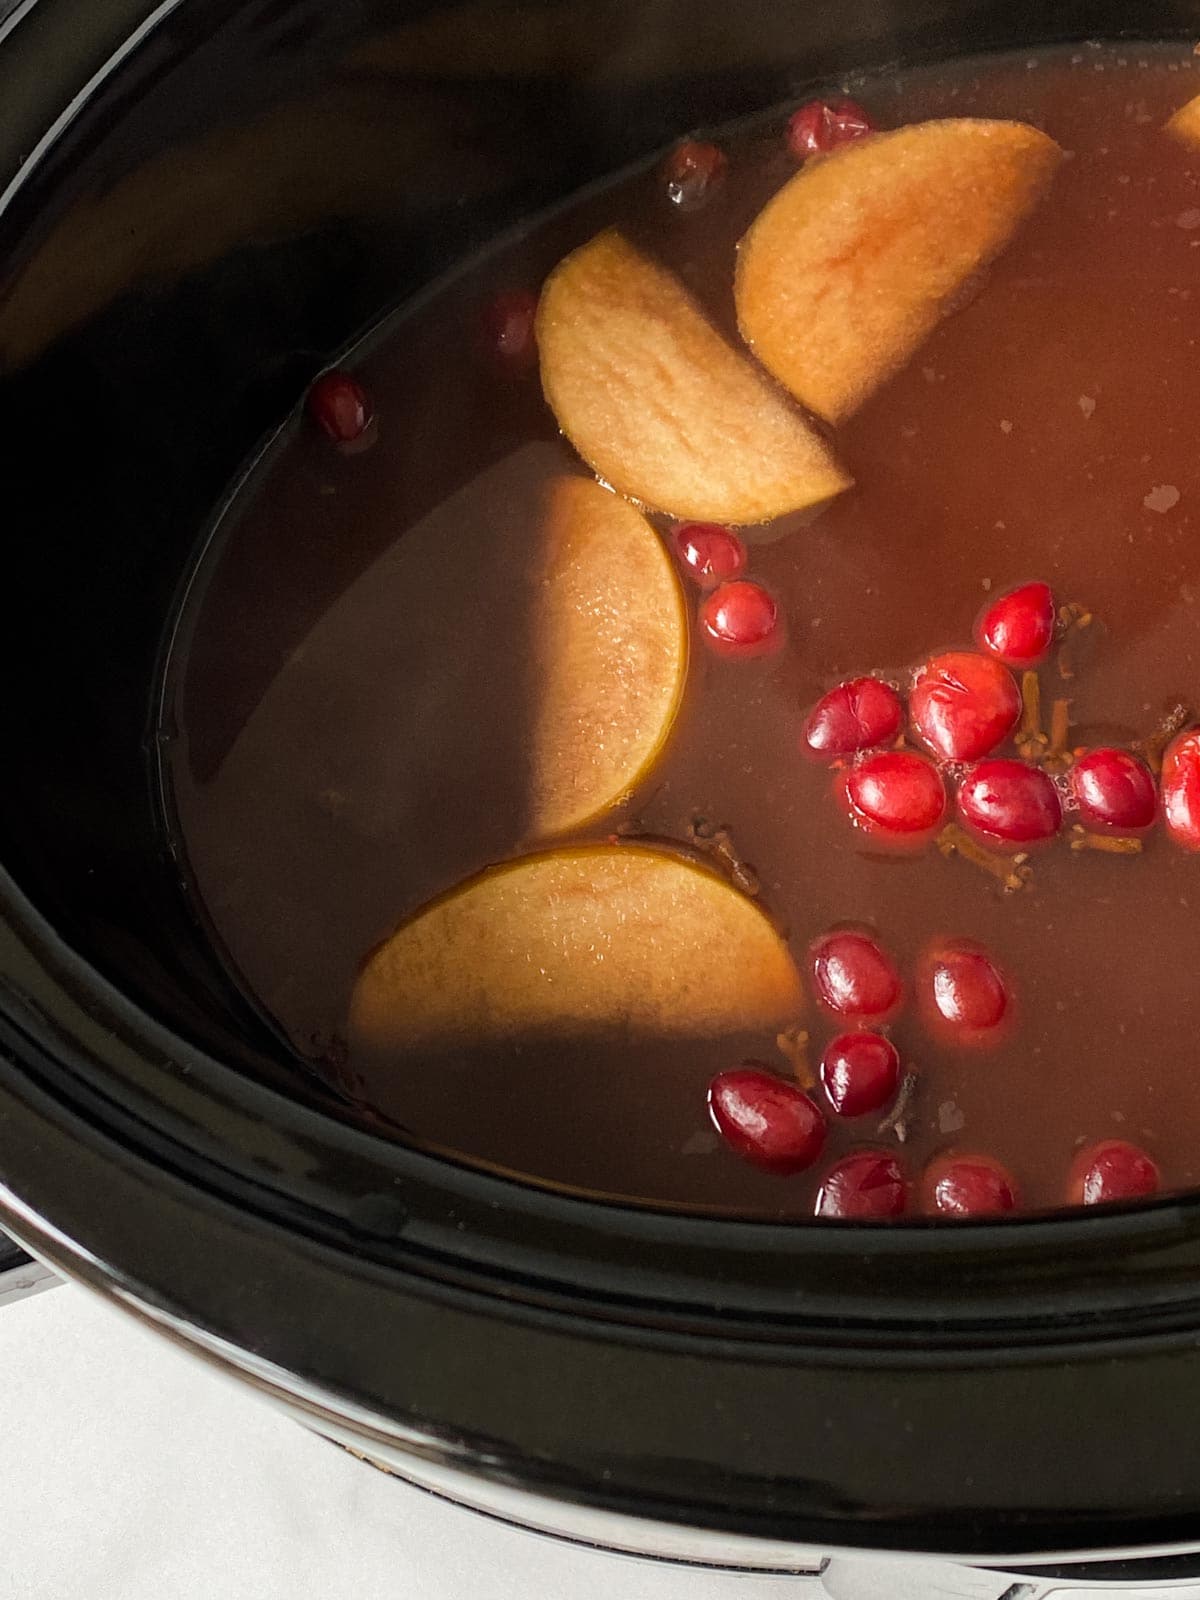 Apples, cranberries, and wassail in a slow cooker.